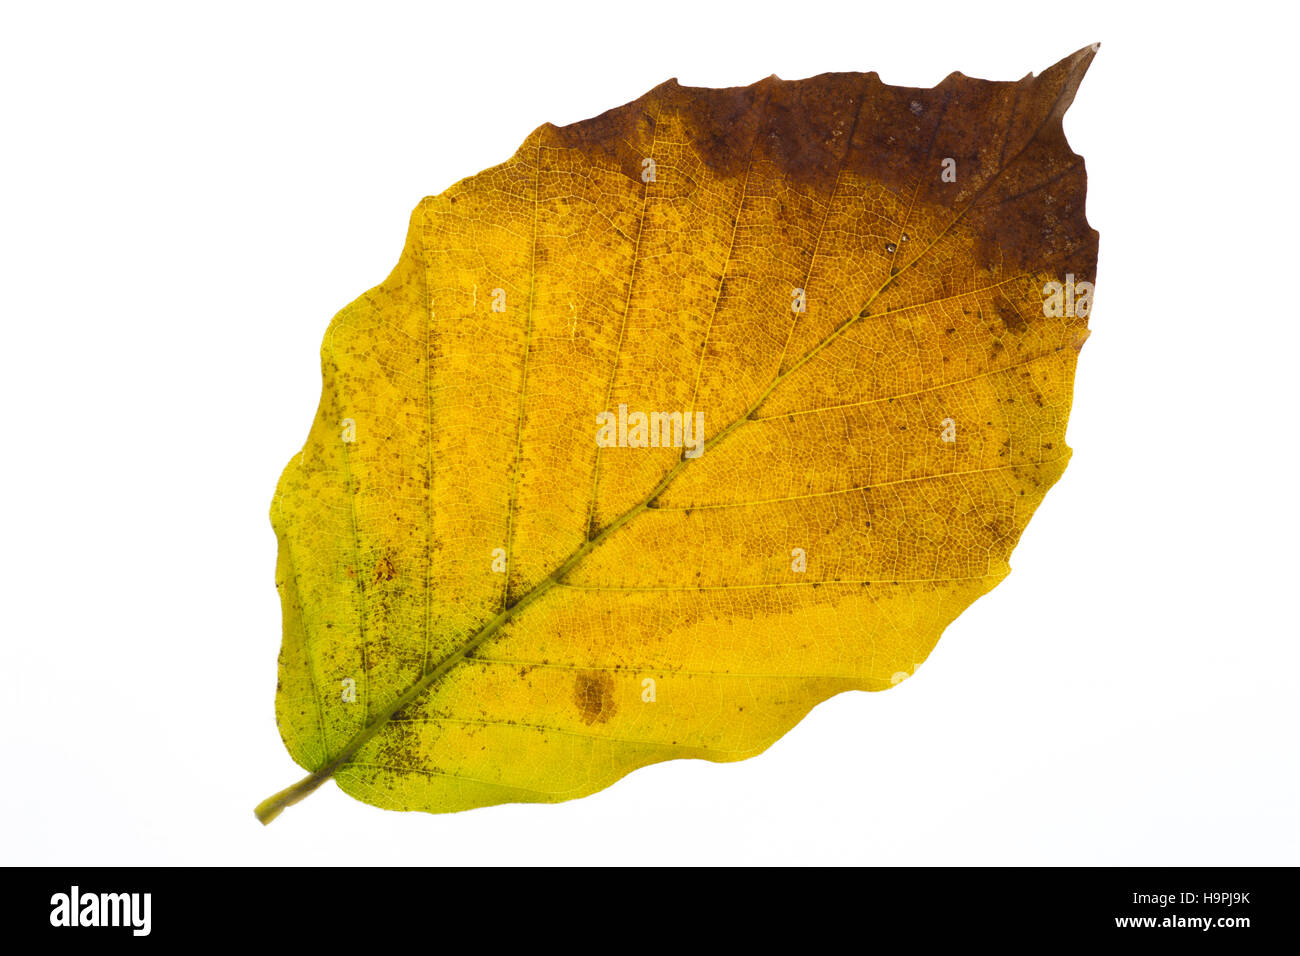 Leaf turning brown in autumn Stock Photo